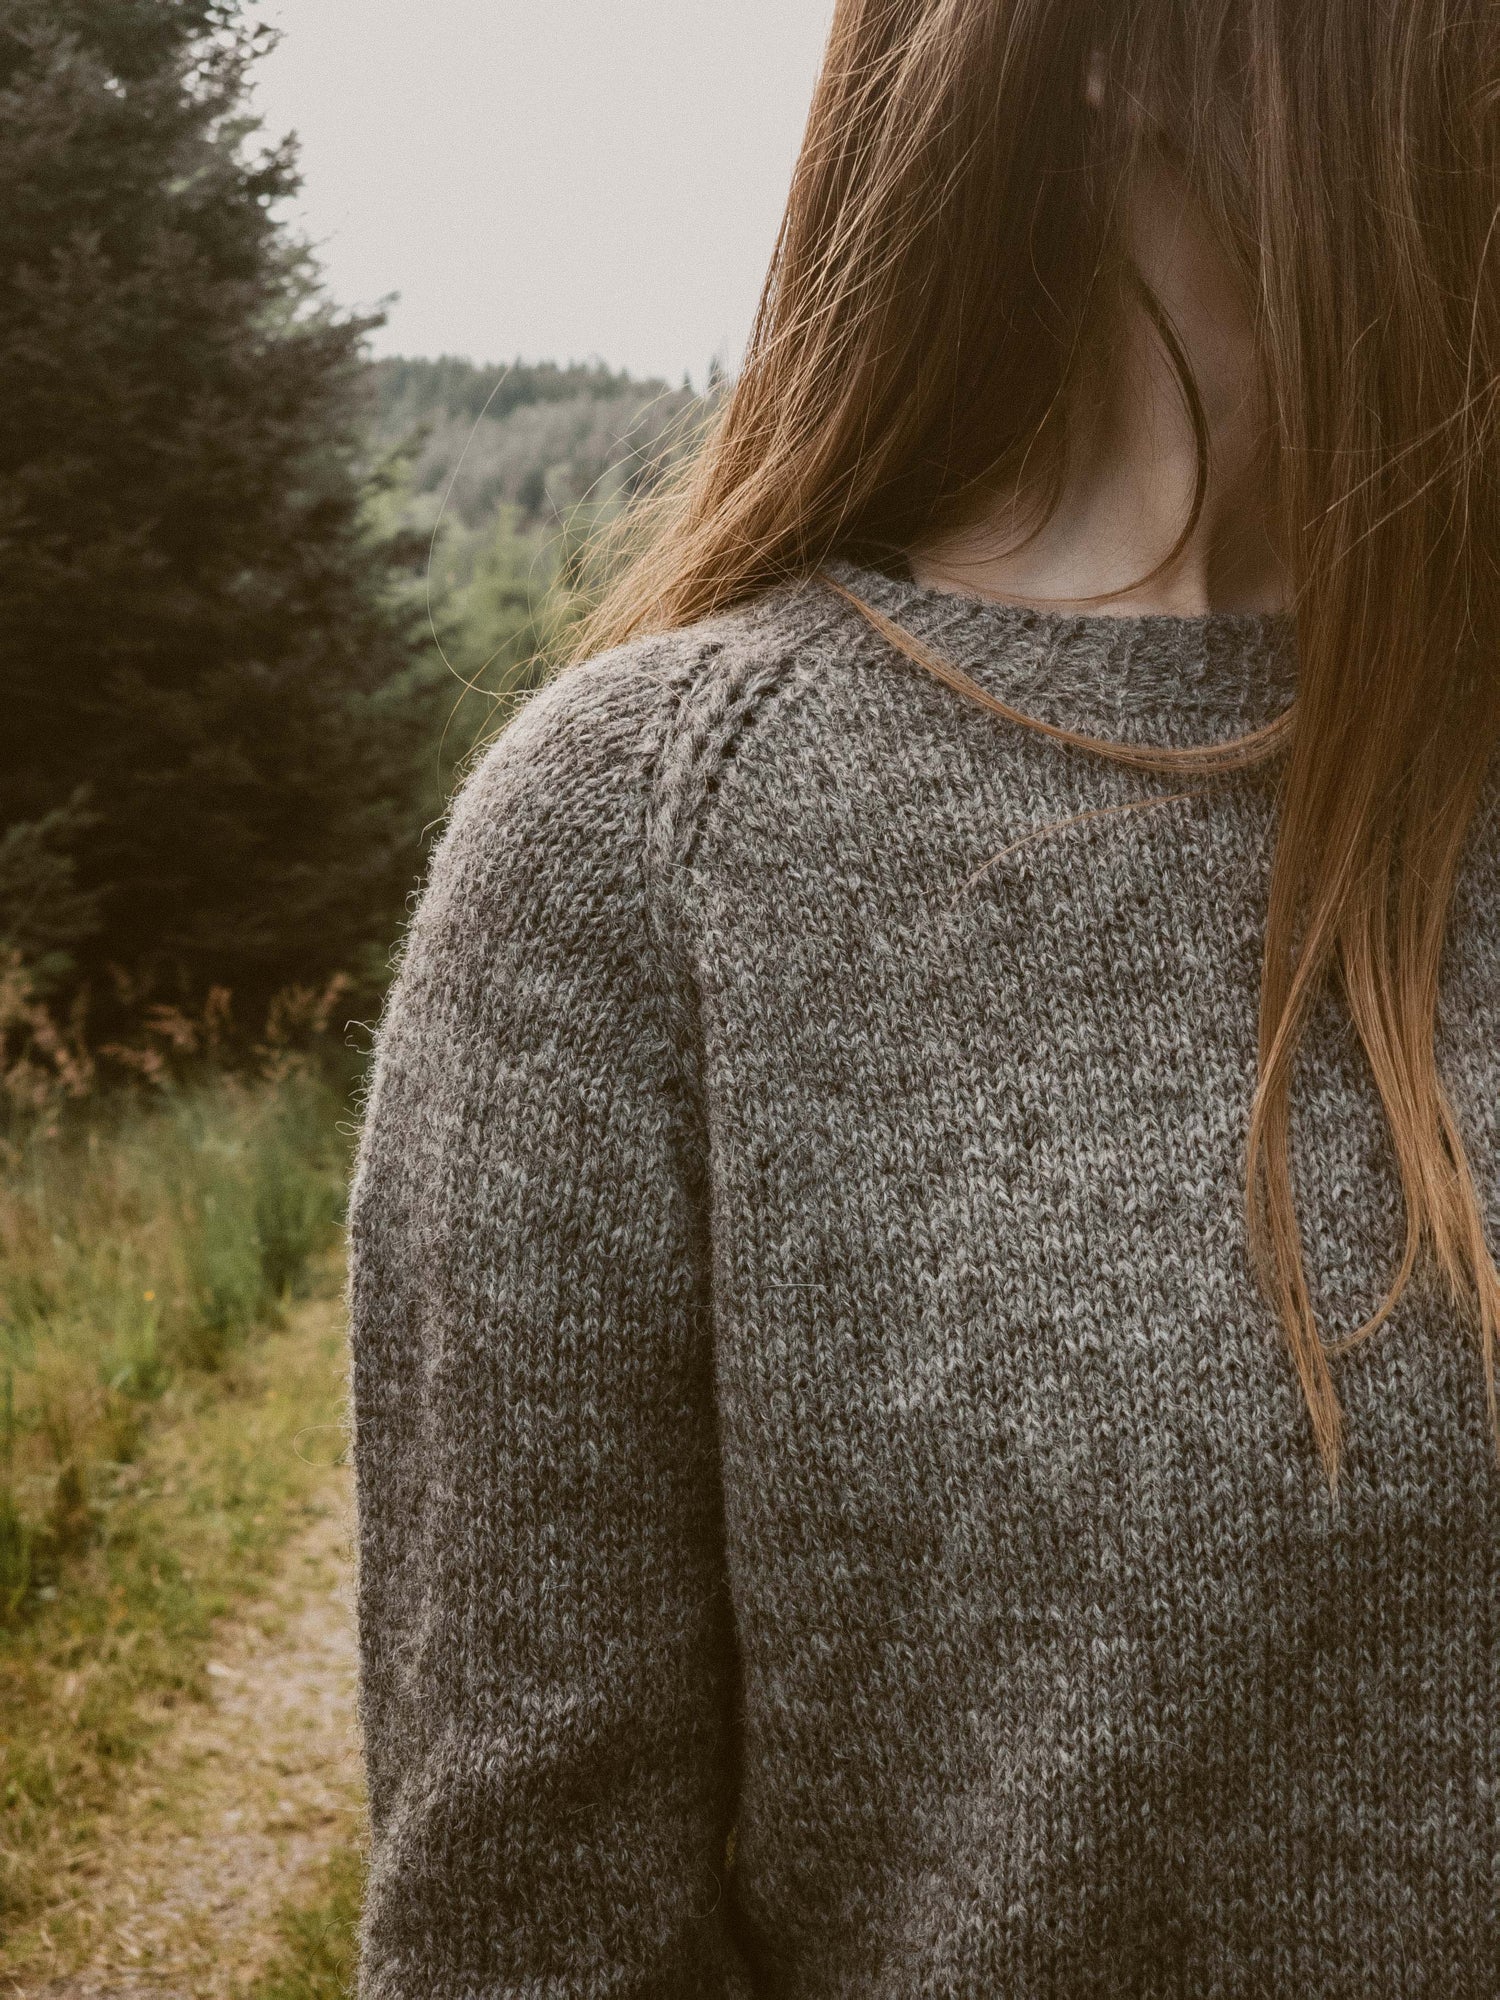 Close-up shot of the Wullpullover sweater handknit in Pommernglück from Calling Sheep, highlighting the front and shoulder detail with an intricate crochet braid.